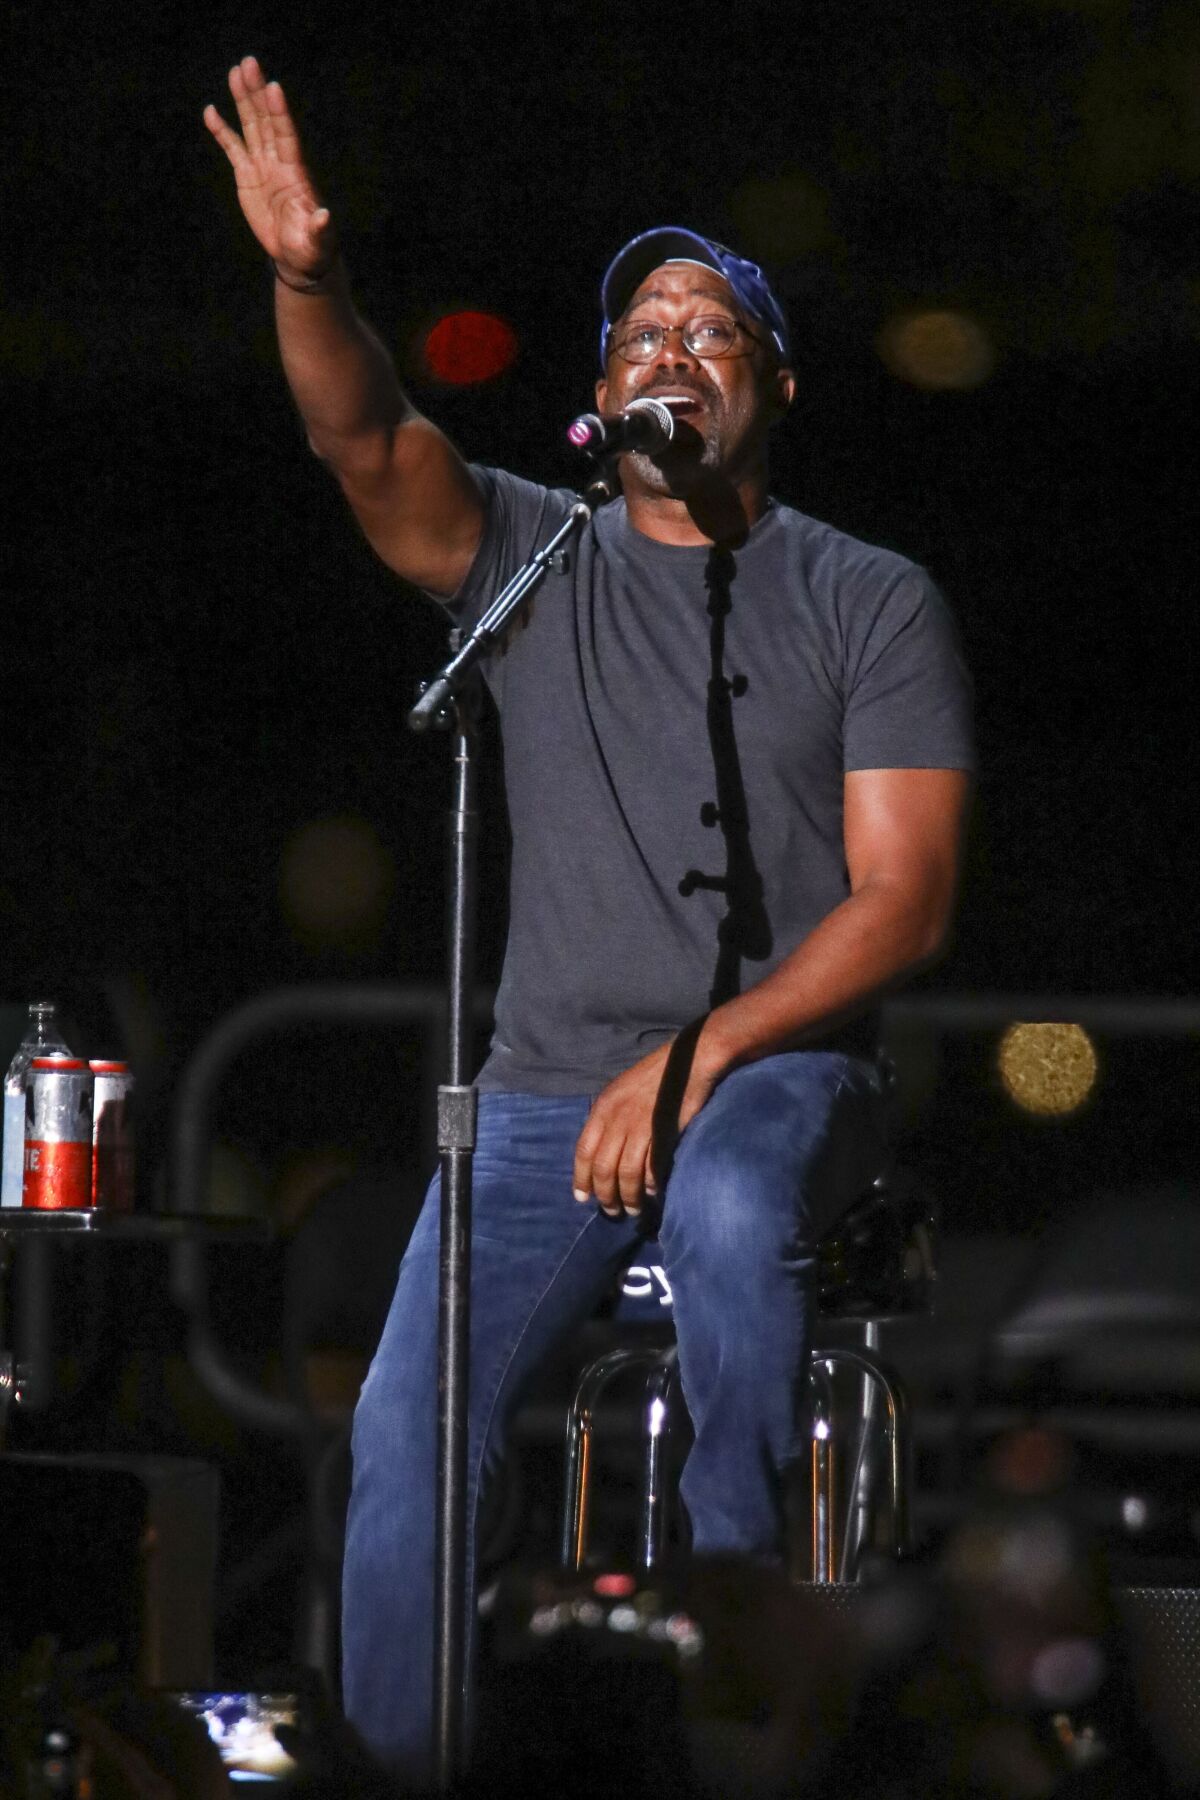 Darius Rucker performs at Audacy's "Stars and Strings" 9/11 benefit event at Pier 17 on Saturday, Sept. 11, 2021, in New York. (Photo by Andy Kropa/Invision/AP)